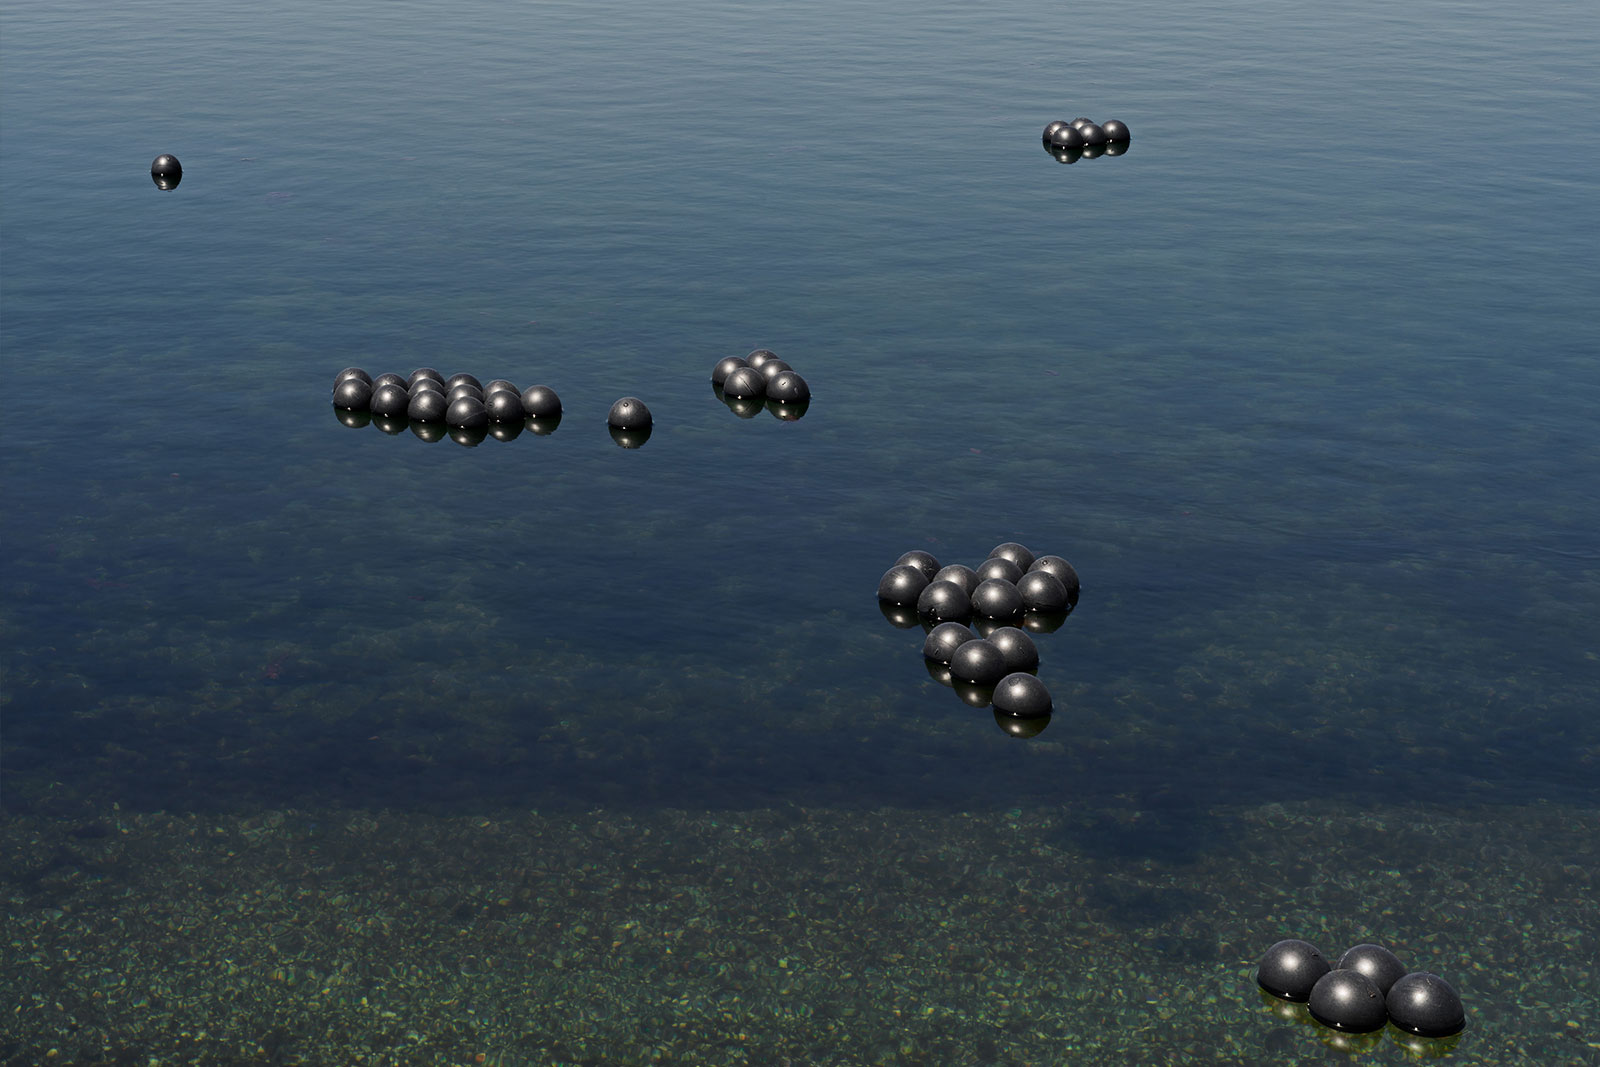 Dozens of black shade balls float in small groupings on the surface of a body of water.